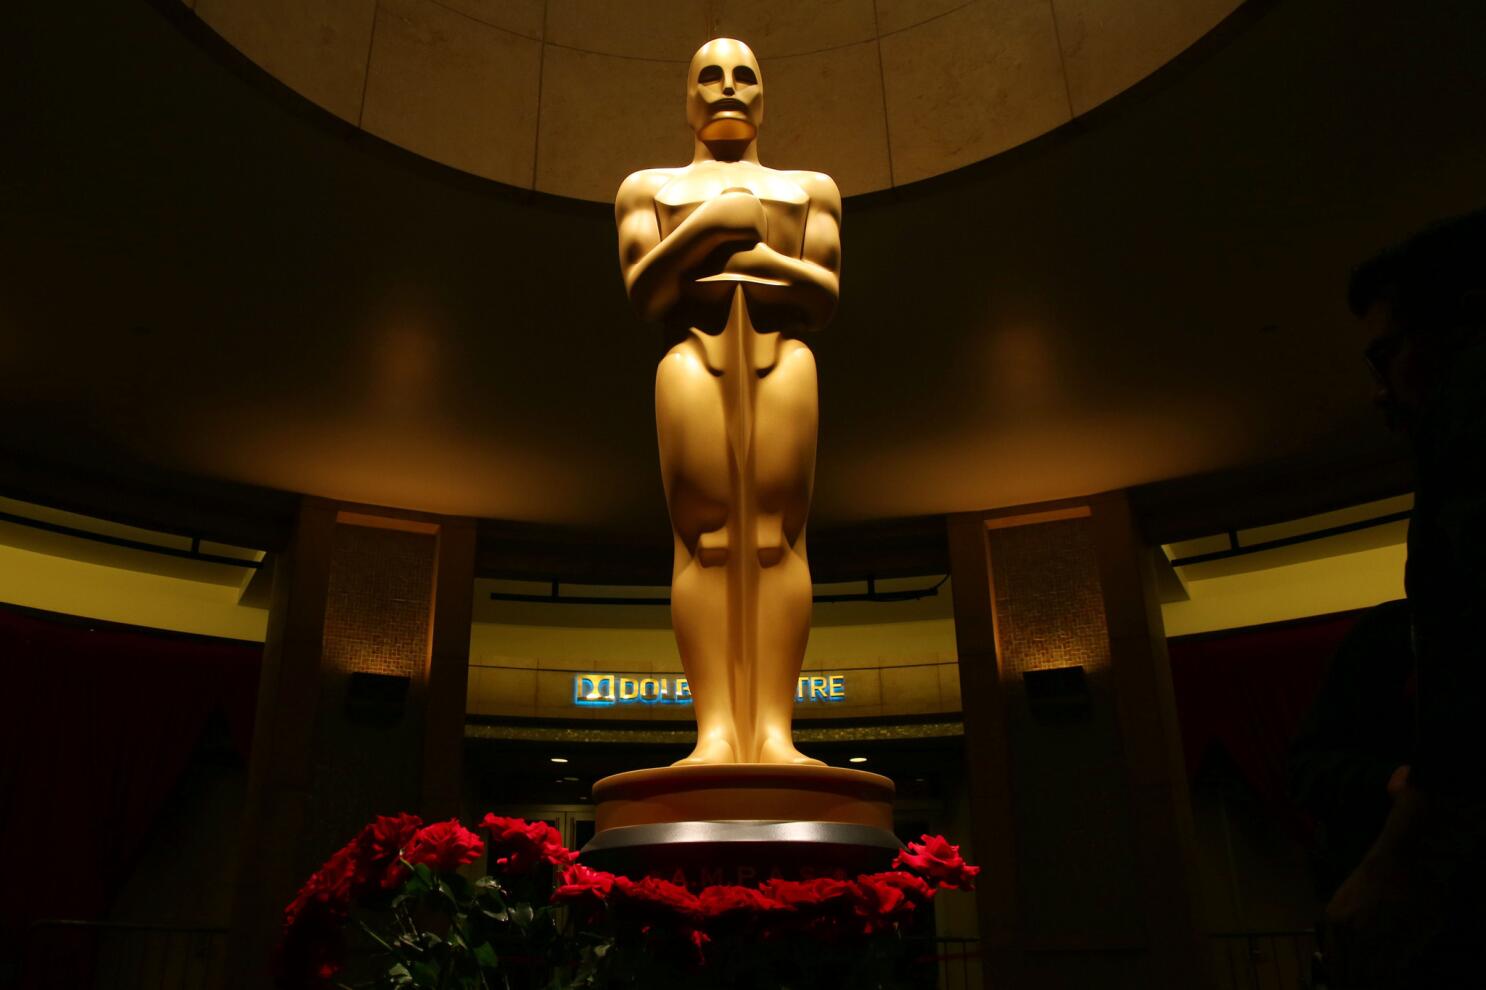 2021 Oscar nominees won't have the option to participate remotely